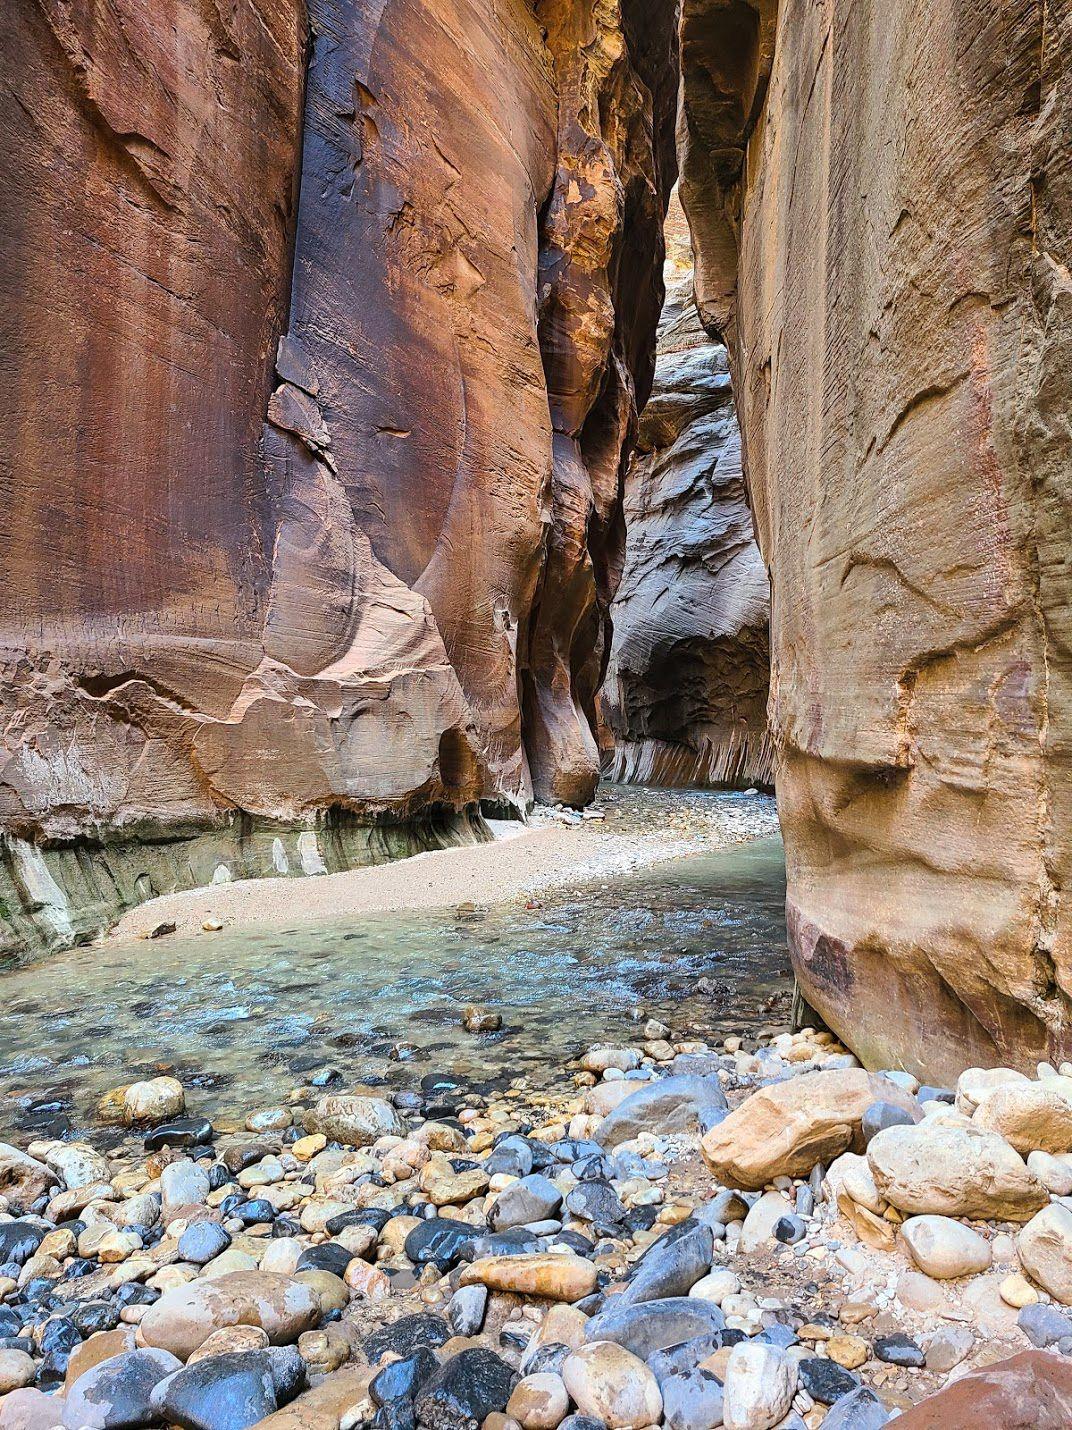 A view of the river flowing between tall canyon walls on The Narrows trail.